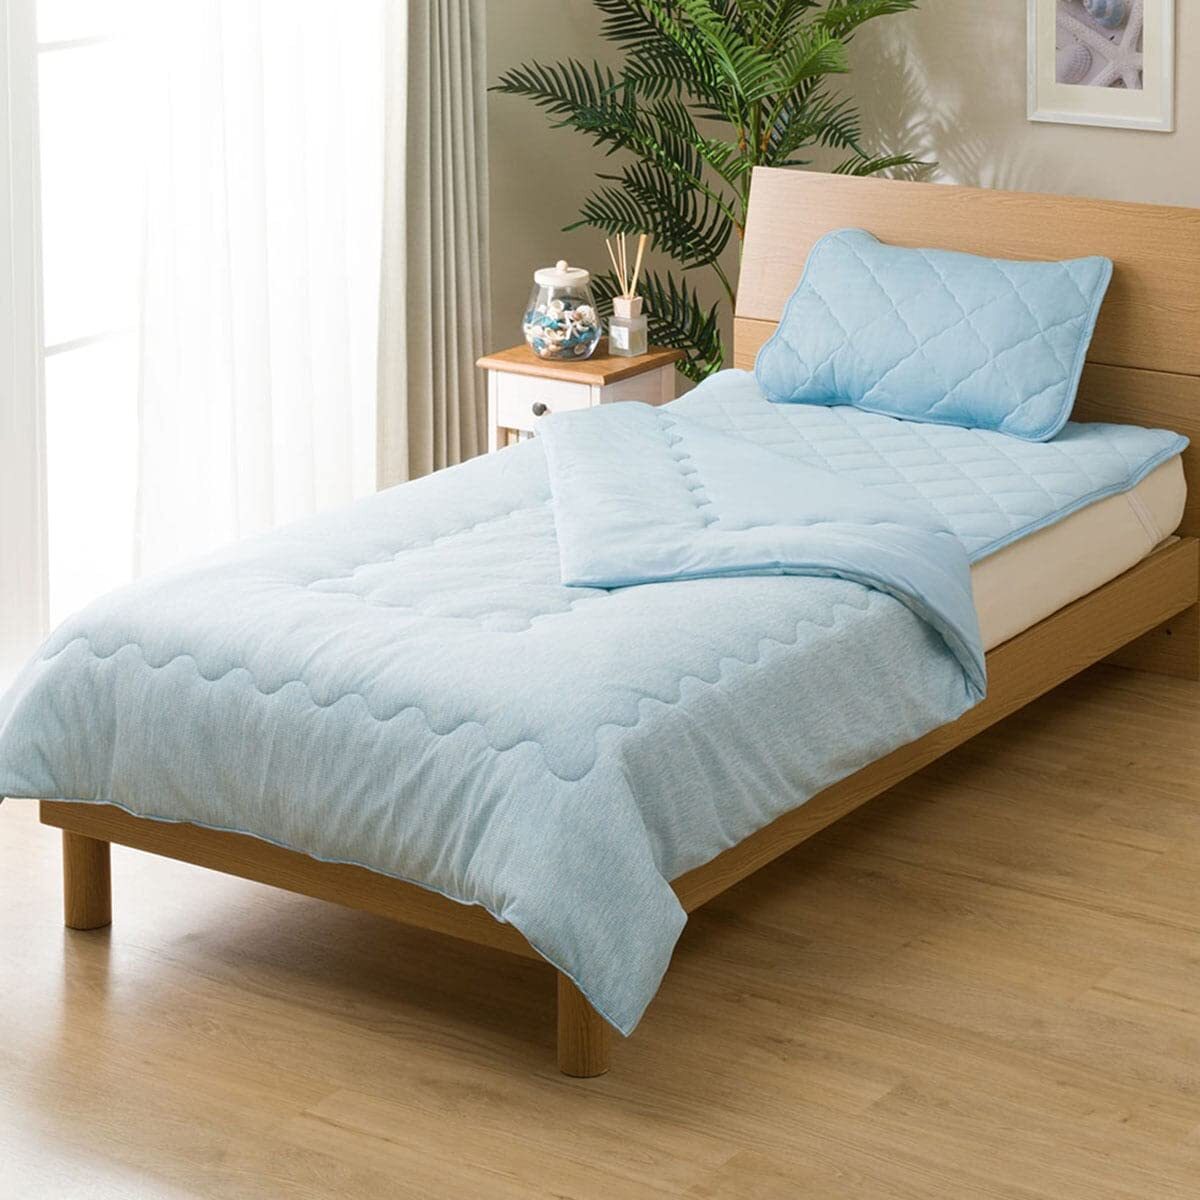 nitoliN cool both sides possible to use contact cold sensation bed pad blue semi-double 120×200cm.... cold want anti-bacterial deodorization ... part shop dried n-s